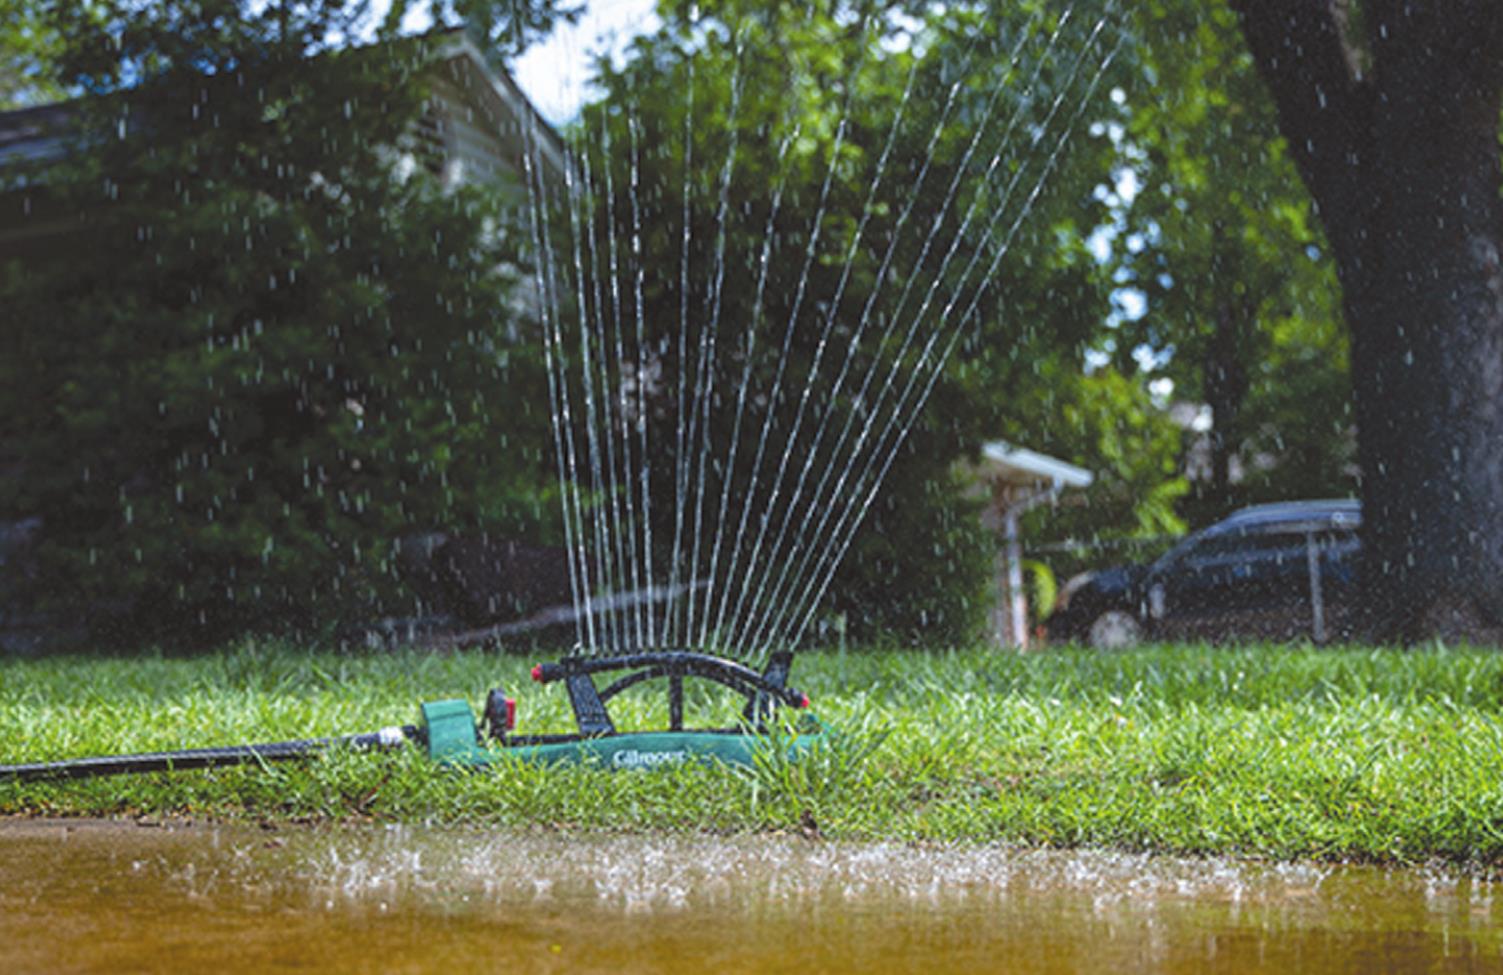 Make sure sprinklers are set so water is applied to the lawn, trees, shrubs and flower beds. Water landing on a driveway or street is wasted. Provided